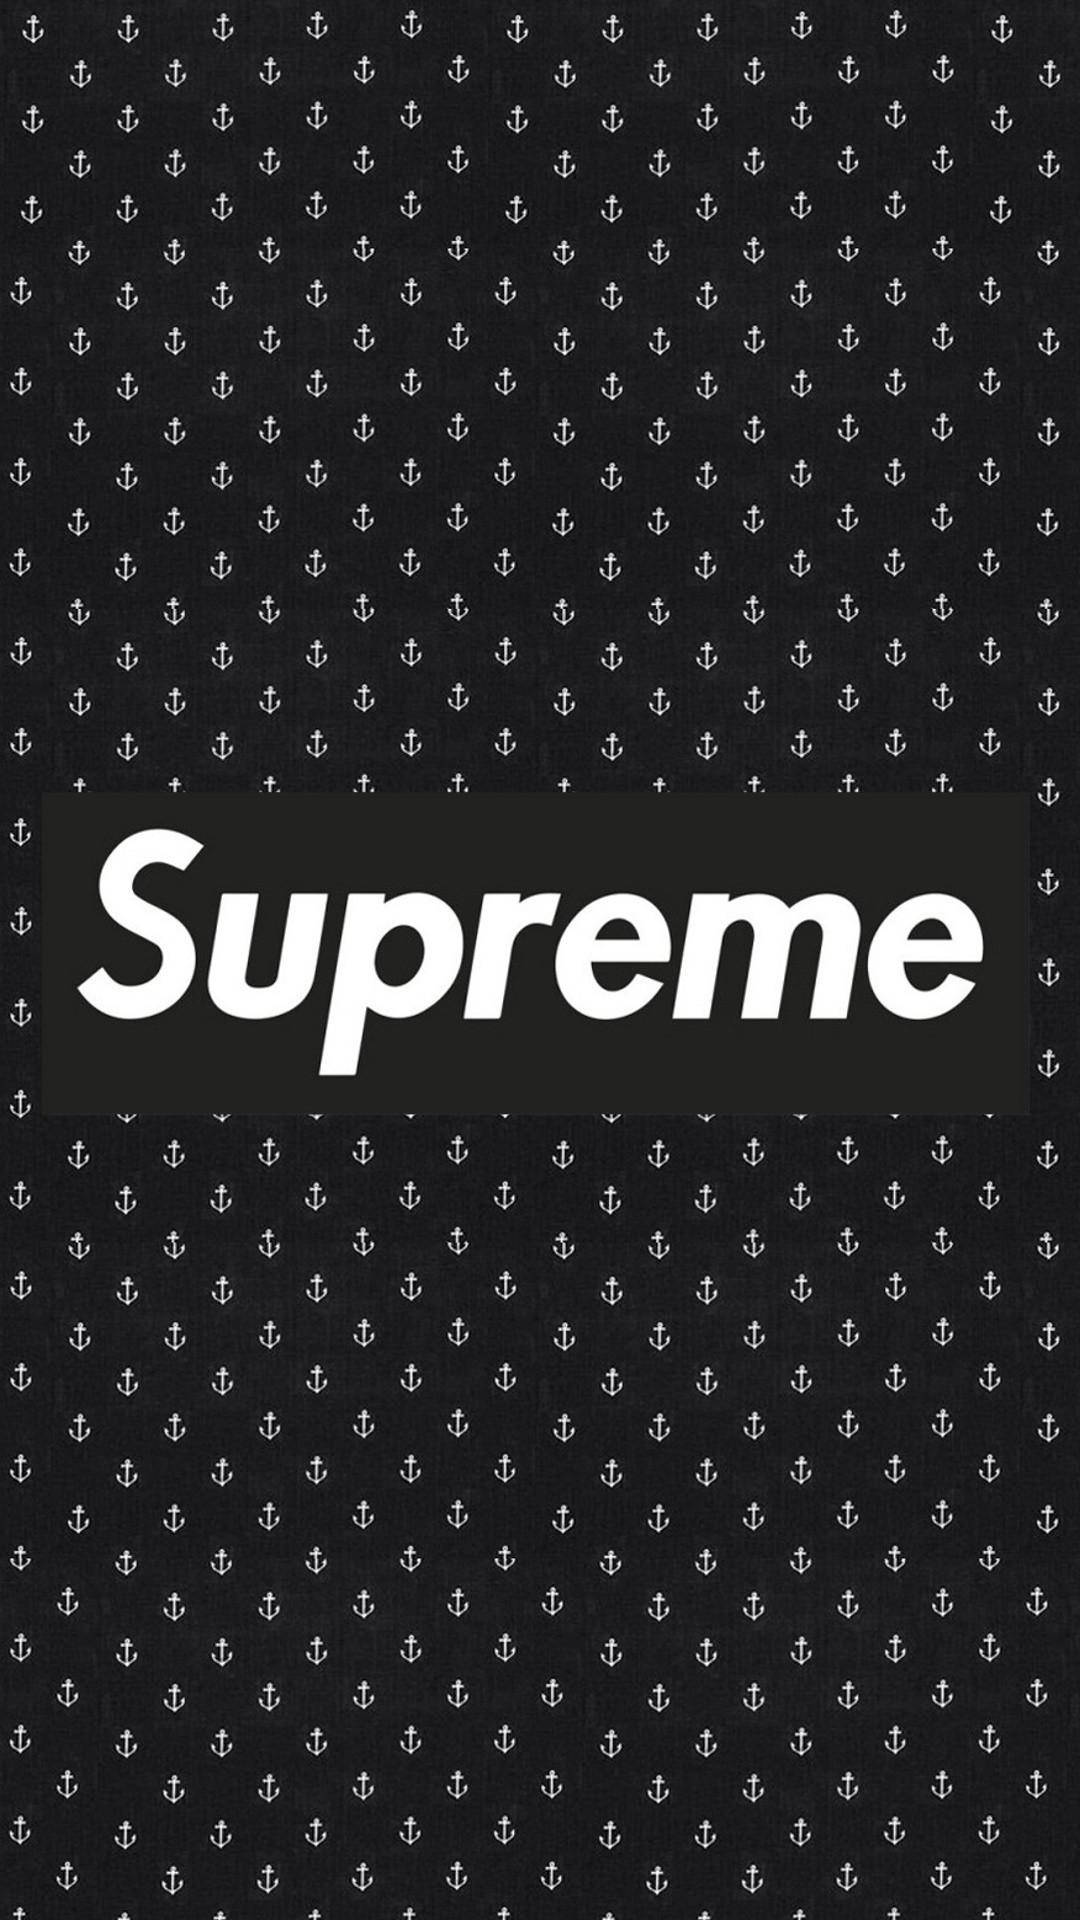 Supreme Black Poster by Rep the Brand - Pixels